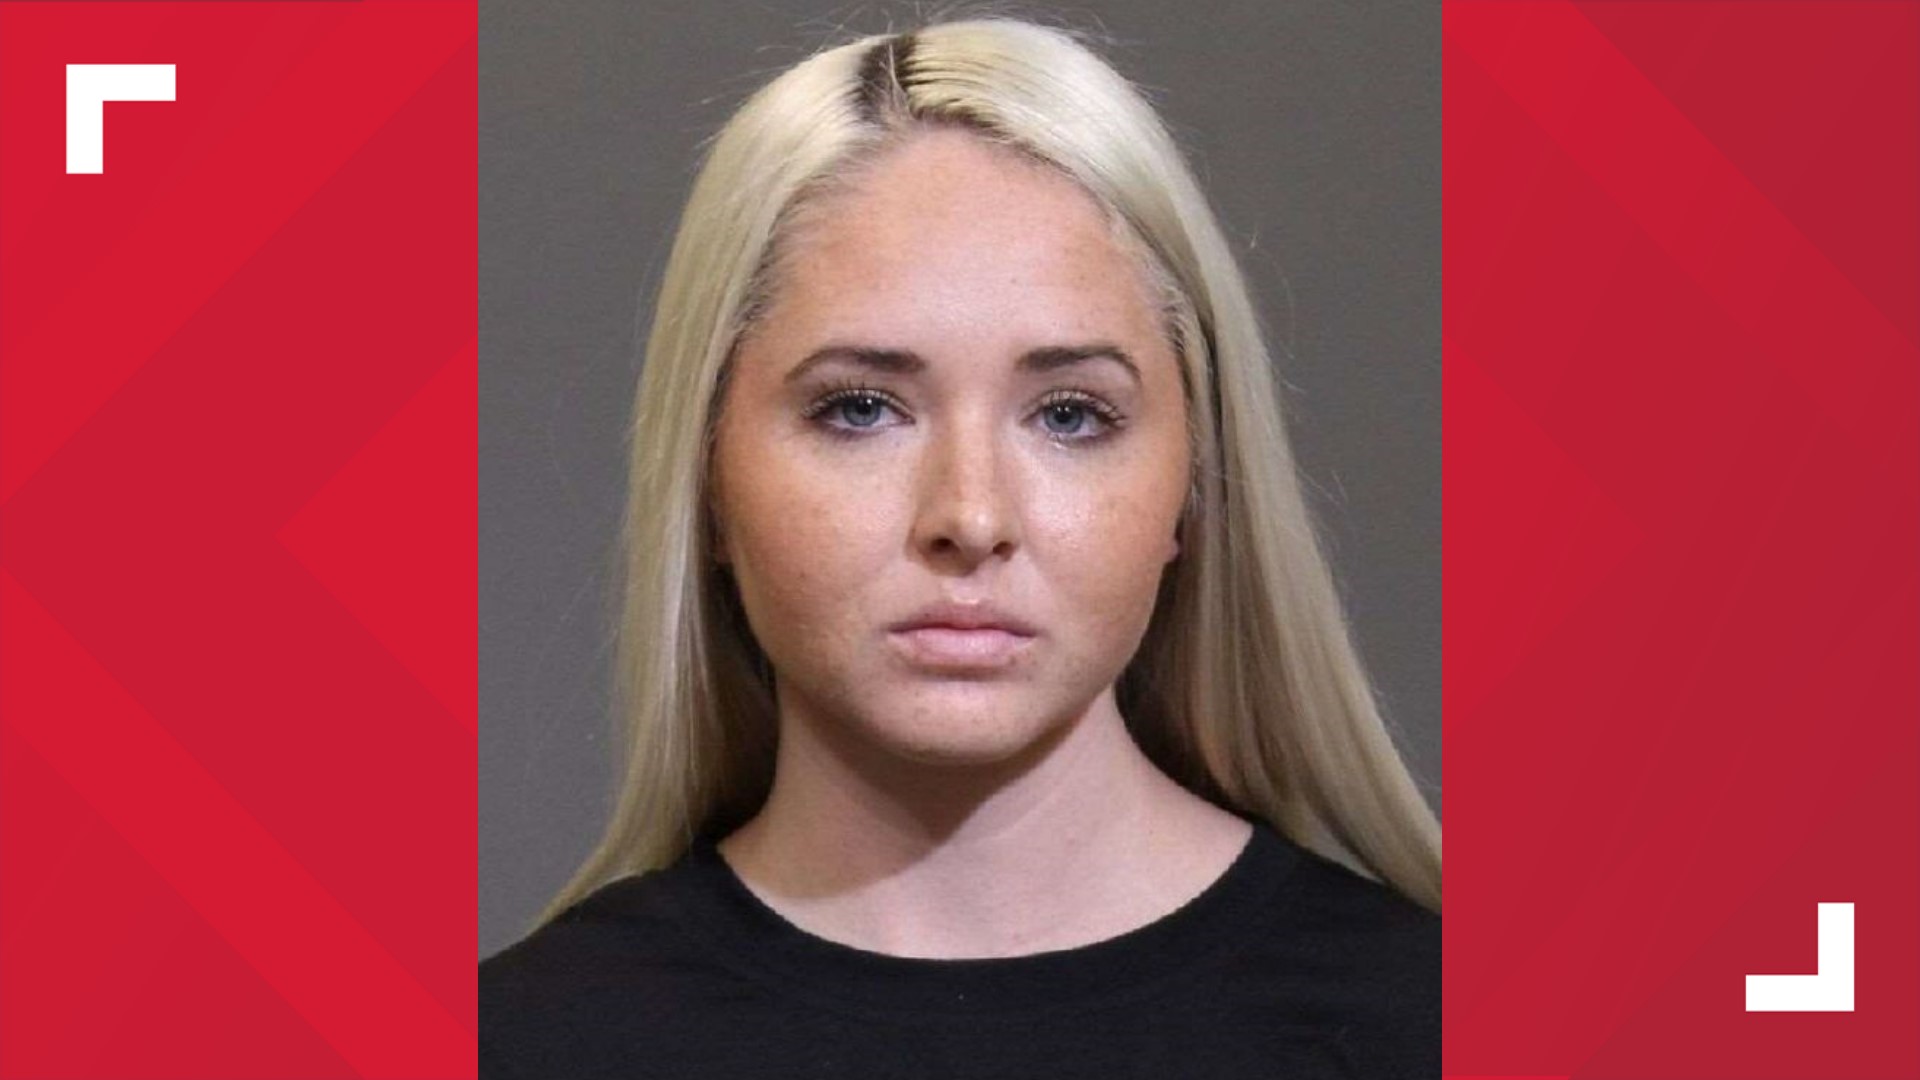 Columbus police arrested Payton Shires, 24, on Oct. 6 and charged her with four counts of unlawful sexual conduct with a minor.